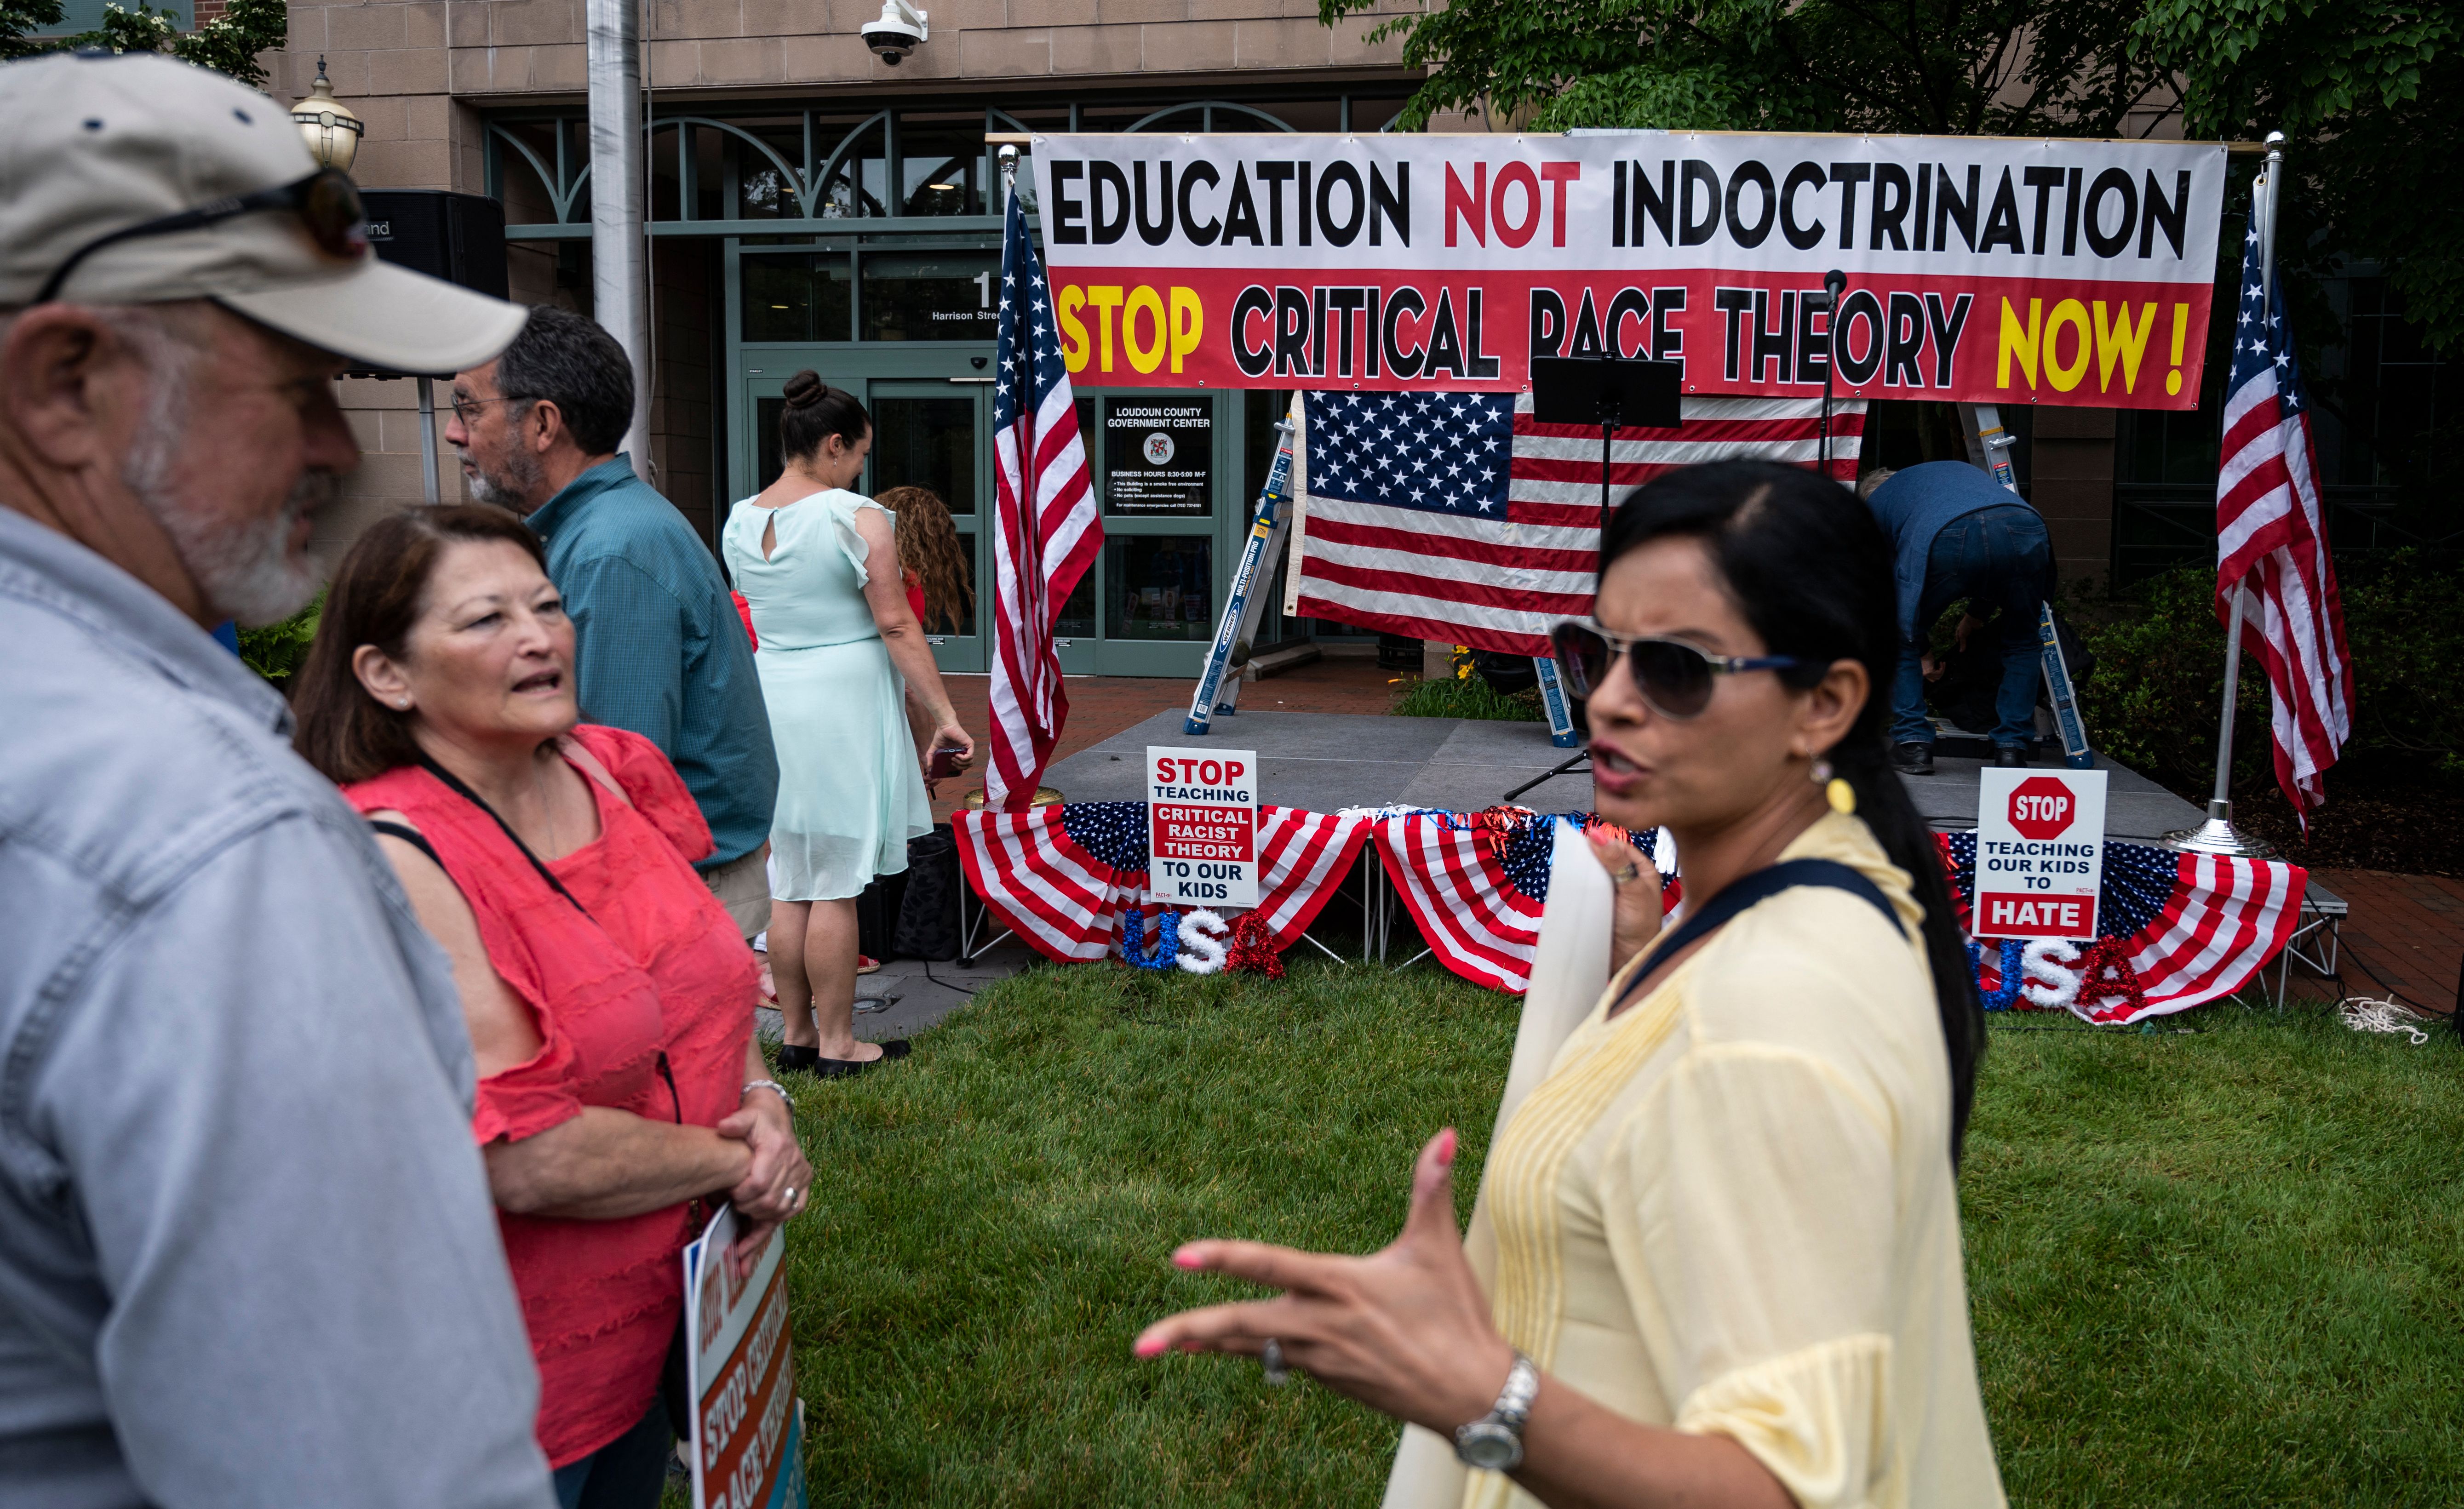 A crowd gathers at a rally against critical race theory in Virginia.